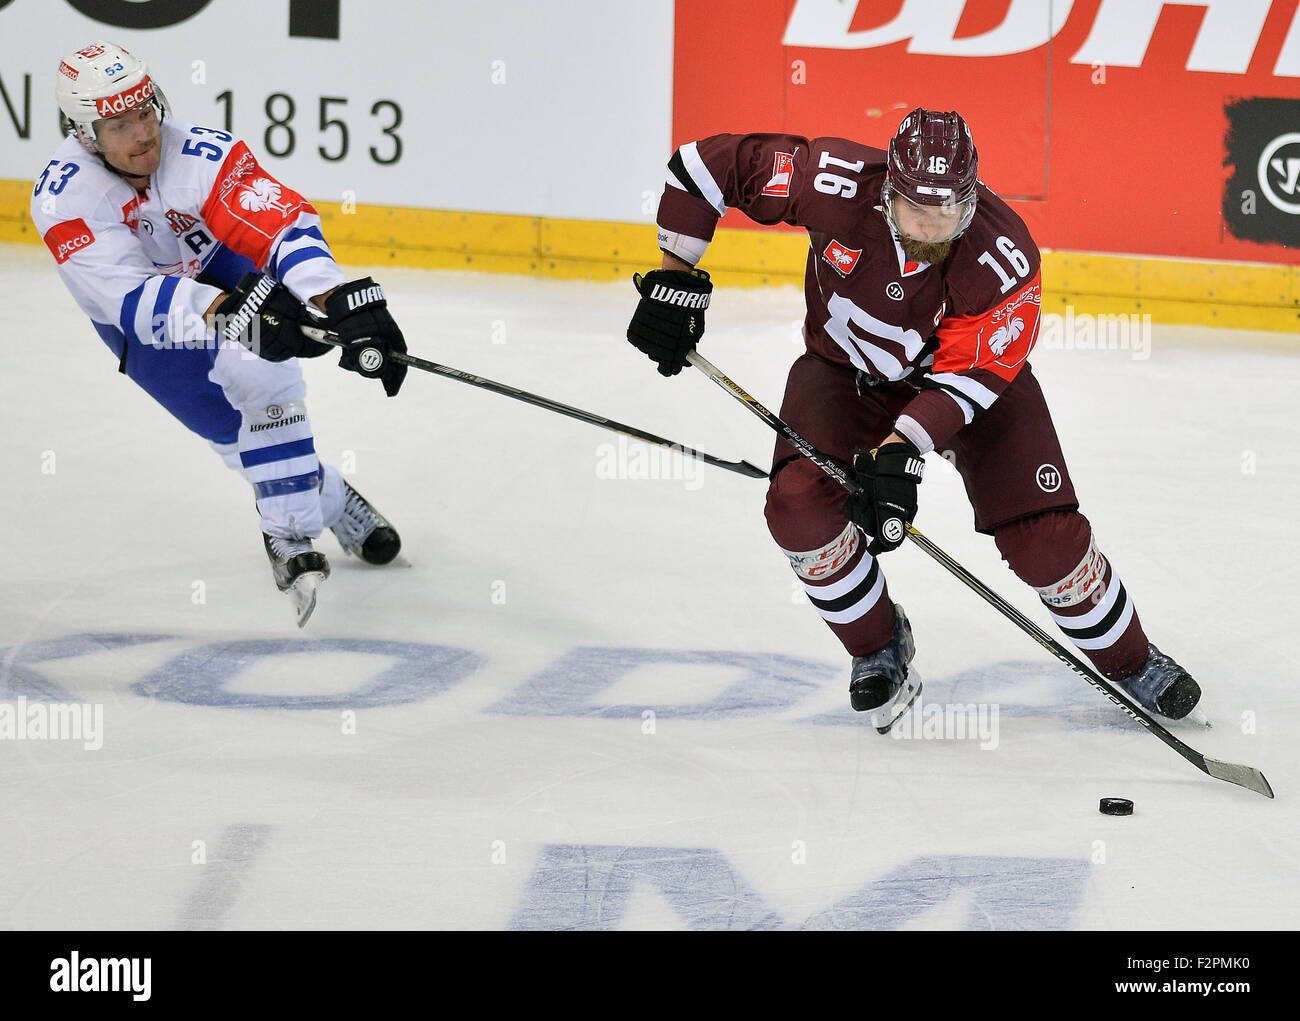 Prague, Czech Republic. 22nd Sep, 2015. From left: Morris Trachsler of Zurich and Adam Polasek of Sparta during the ice hockey Champions League, 1st round play off match HC Sparta Praha vs ZSC Zurich Lions in Prague, Czech Republic, September 22, 2015. © Katerina Sulova/CTK Photo/Alamy Live News Stock Photo